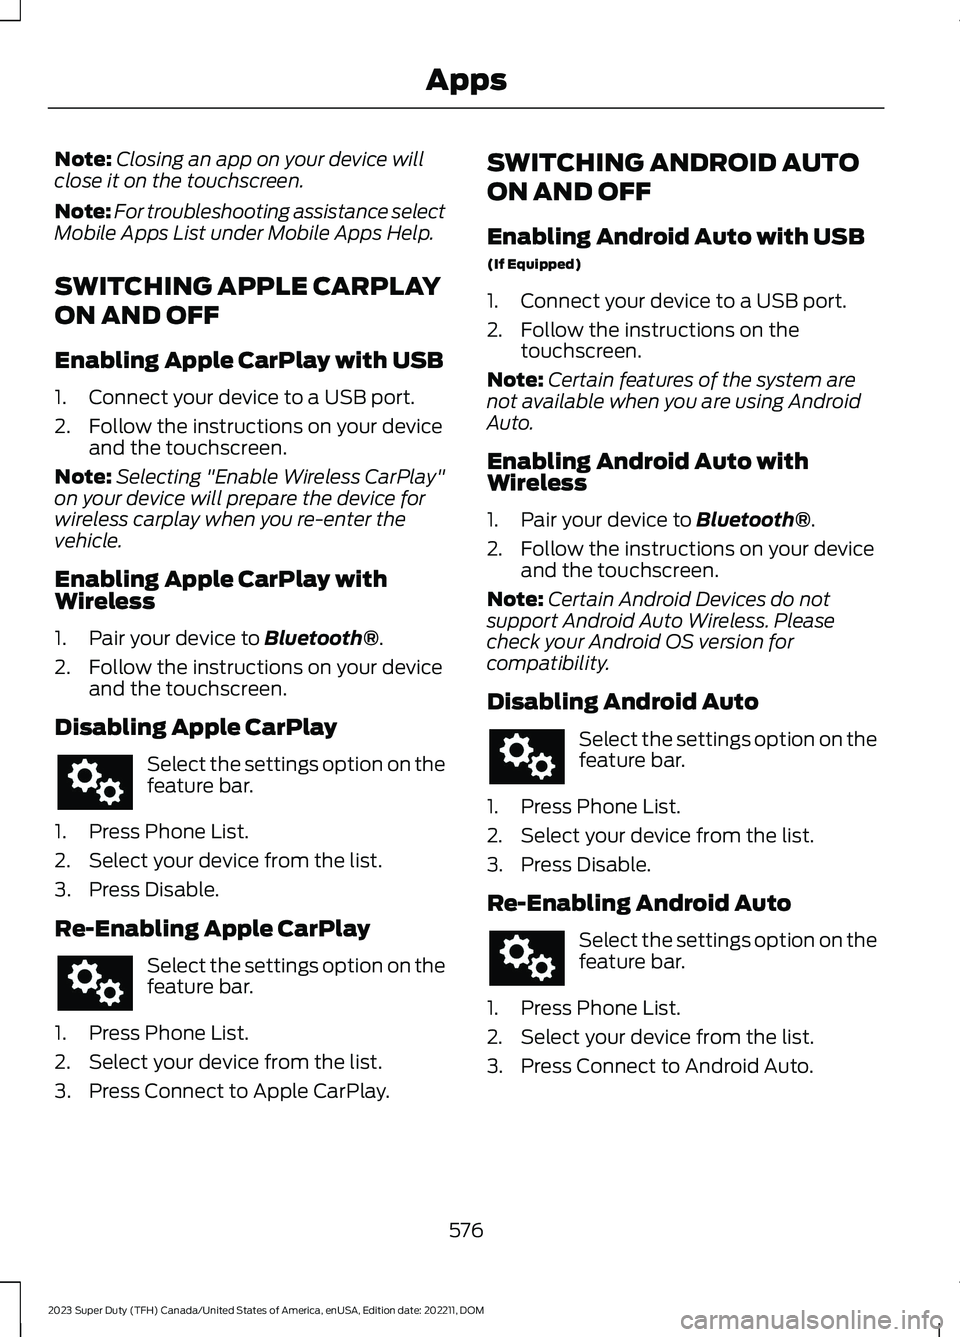 FORD SUPER DUTY 2023  Owners Manual Note:Closing an app on your device willclose it on the touchscreen.
Note:For troubleshooting assistance selectMobile Apps List under Mobile Apps Help.
SWITCHING APPLE CARPLAY
ON AND OFF
Enabling Apple